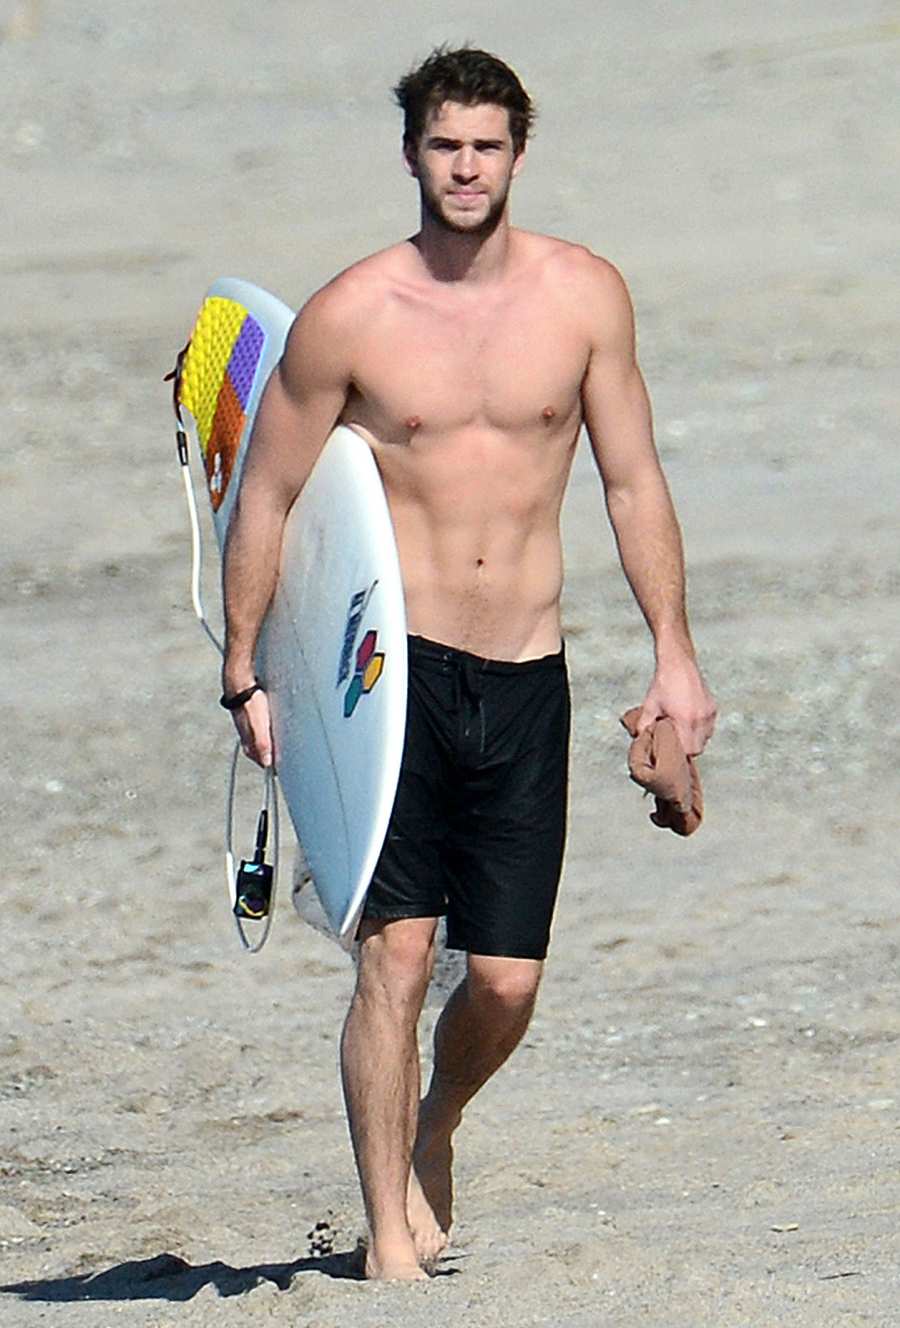 Shirtless Hunks- Hot Celebs and Their Insane Physiques Liam Hemsworth